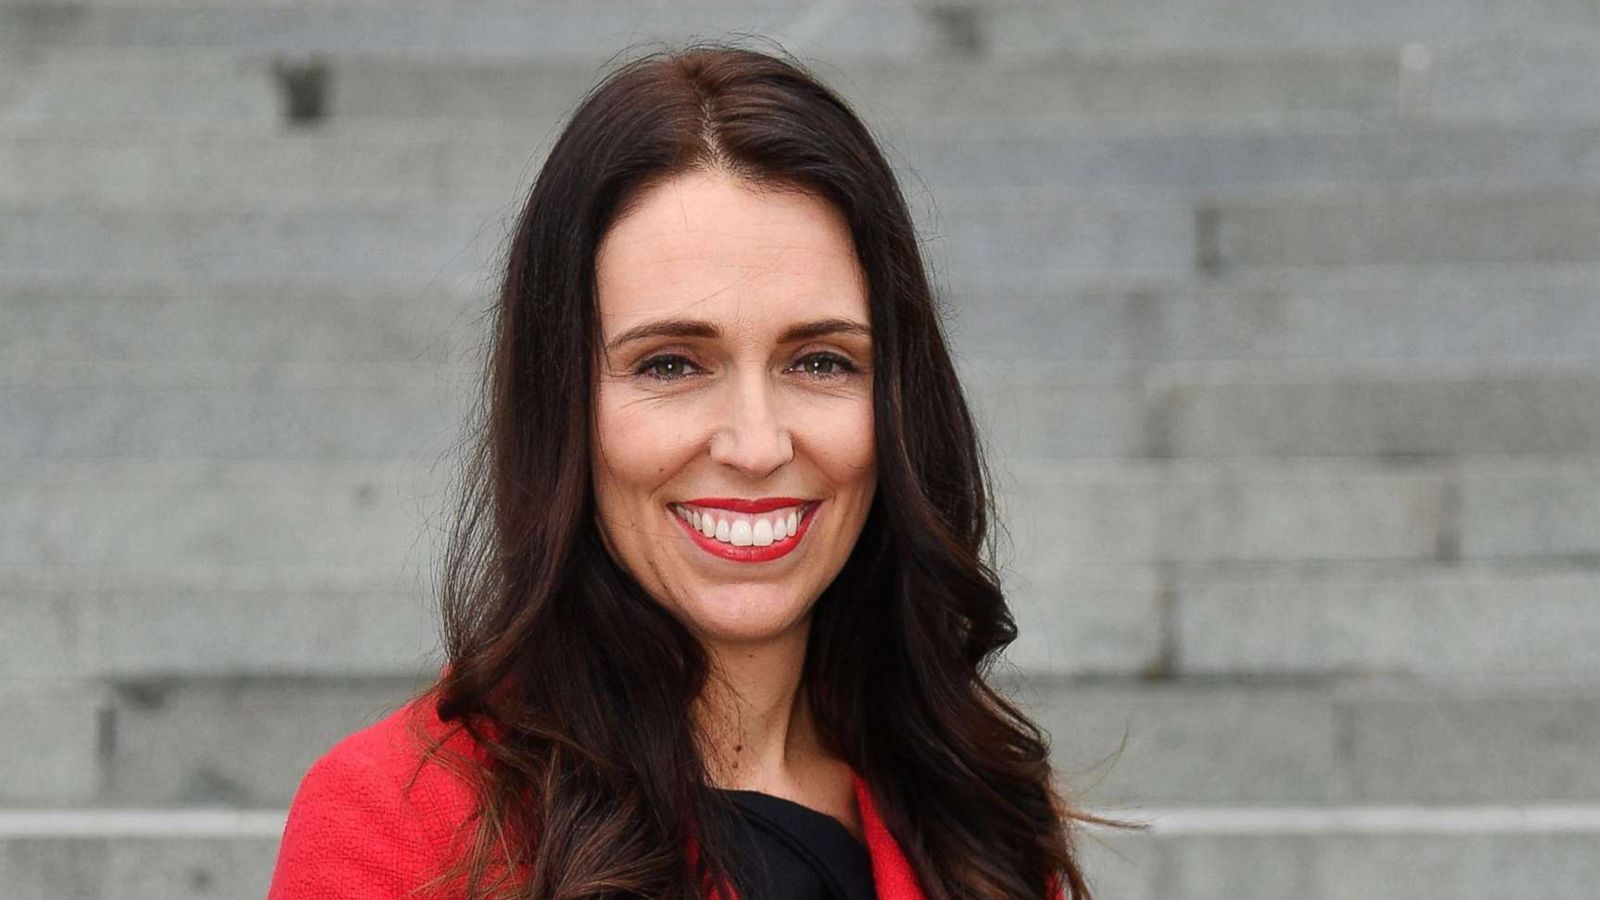 Interviewer calling New Zealand prime minister 'so attractive' decried as 'sexist'